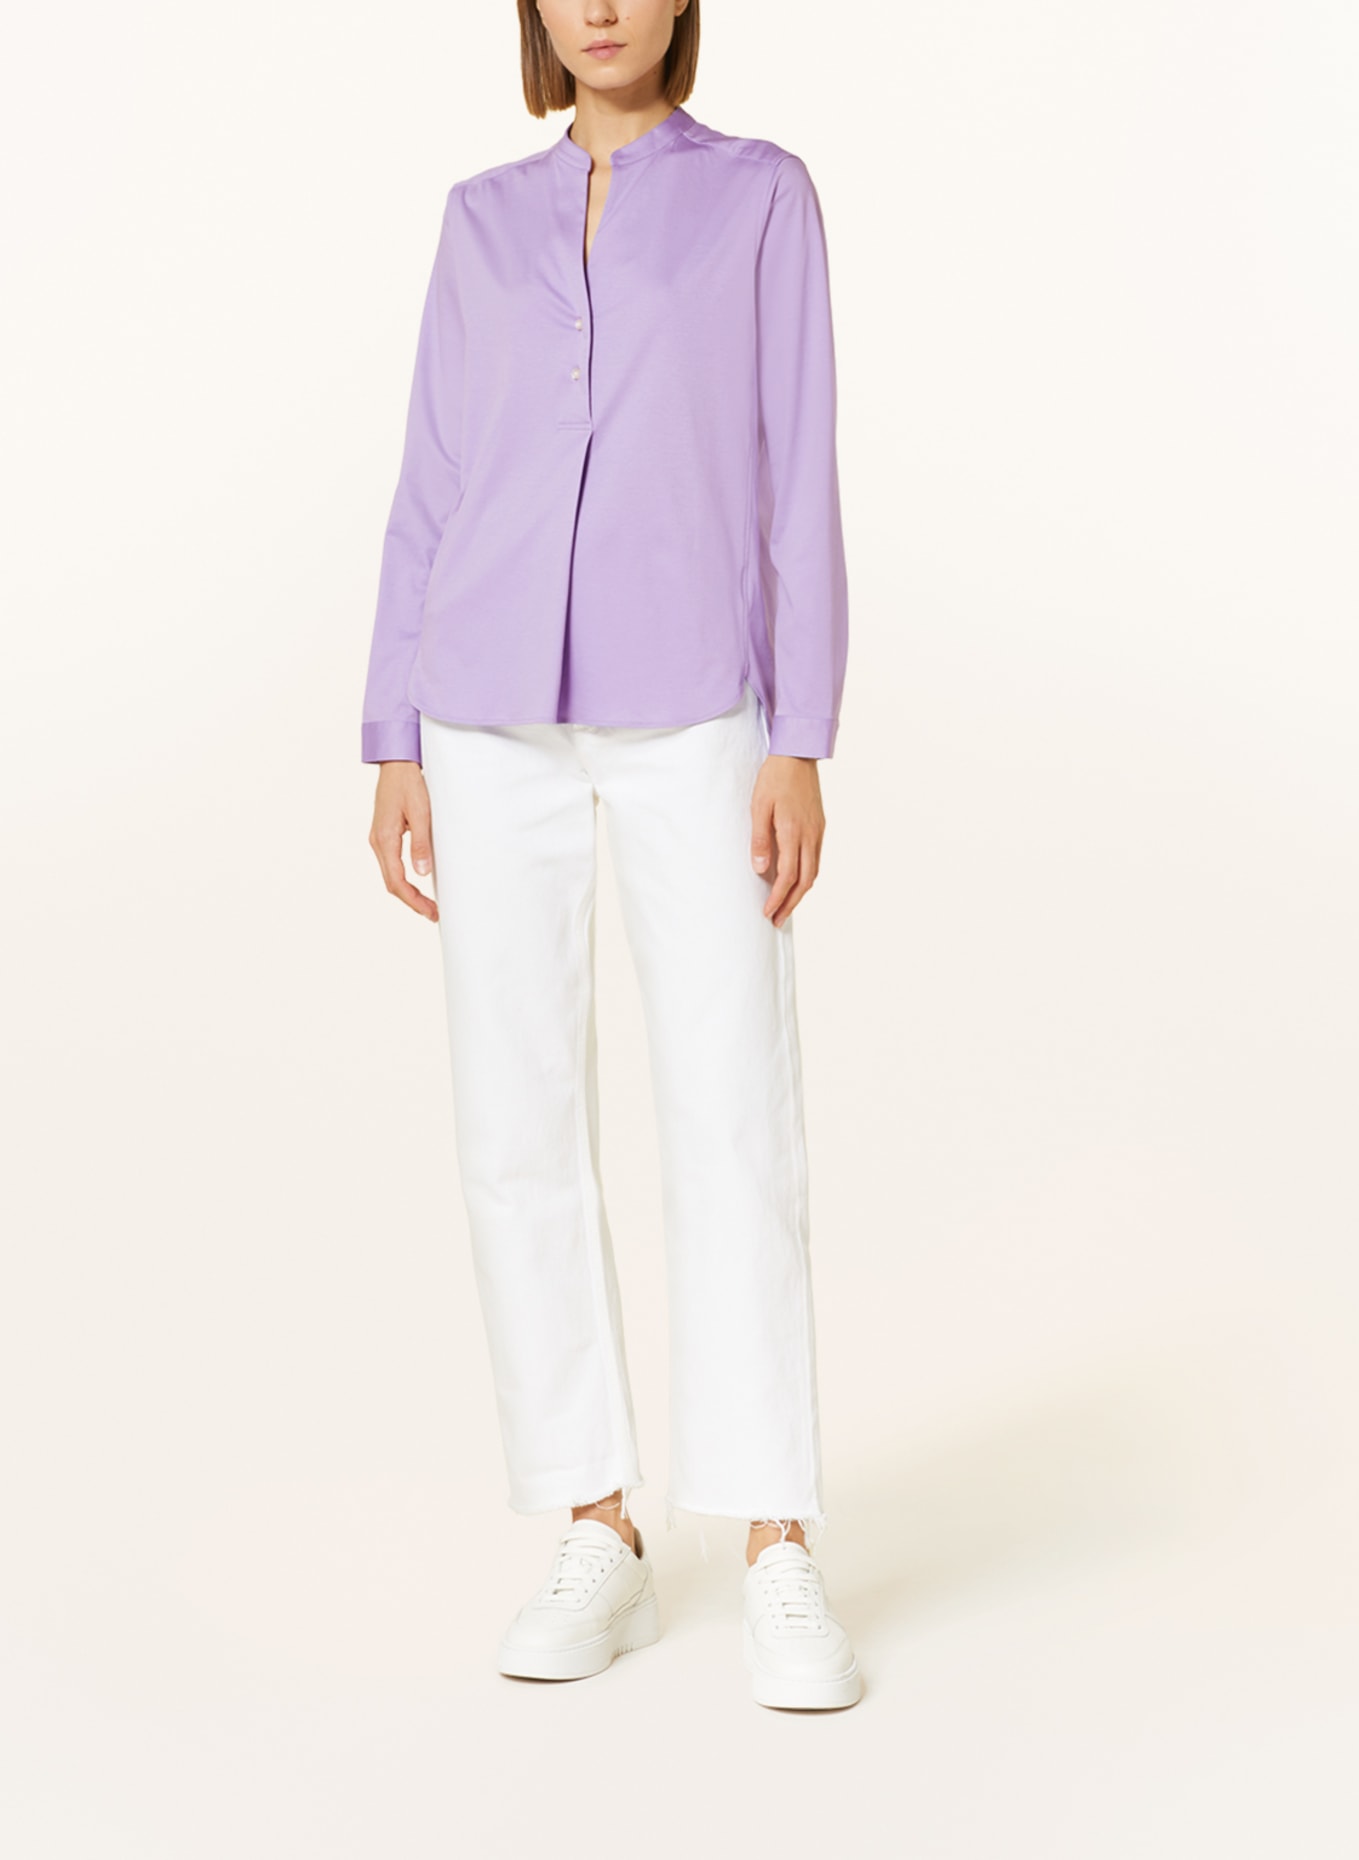 Soluzione Shirt blouse made of jersey, Color: LIGHT PURPLE (Image 2)